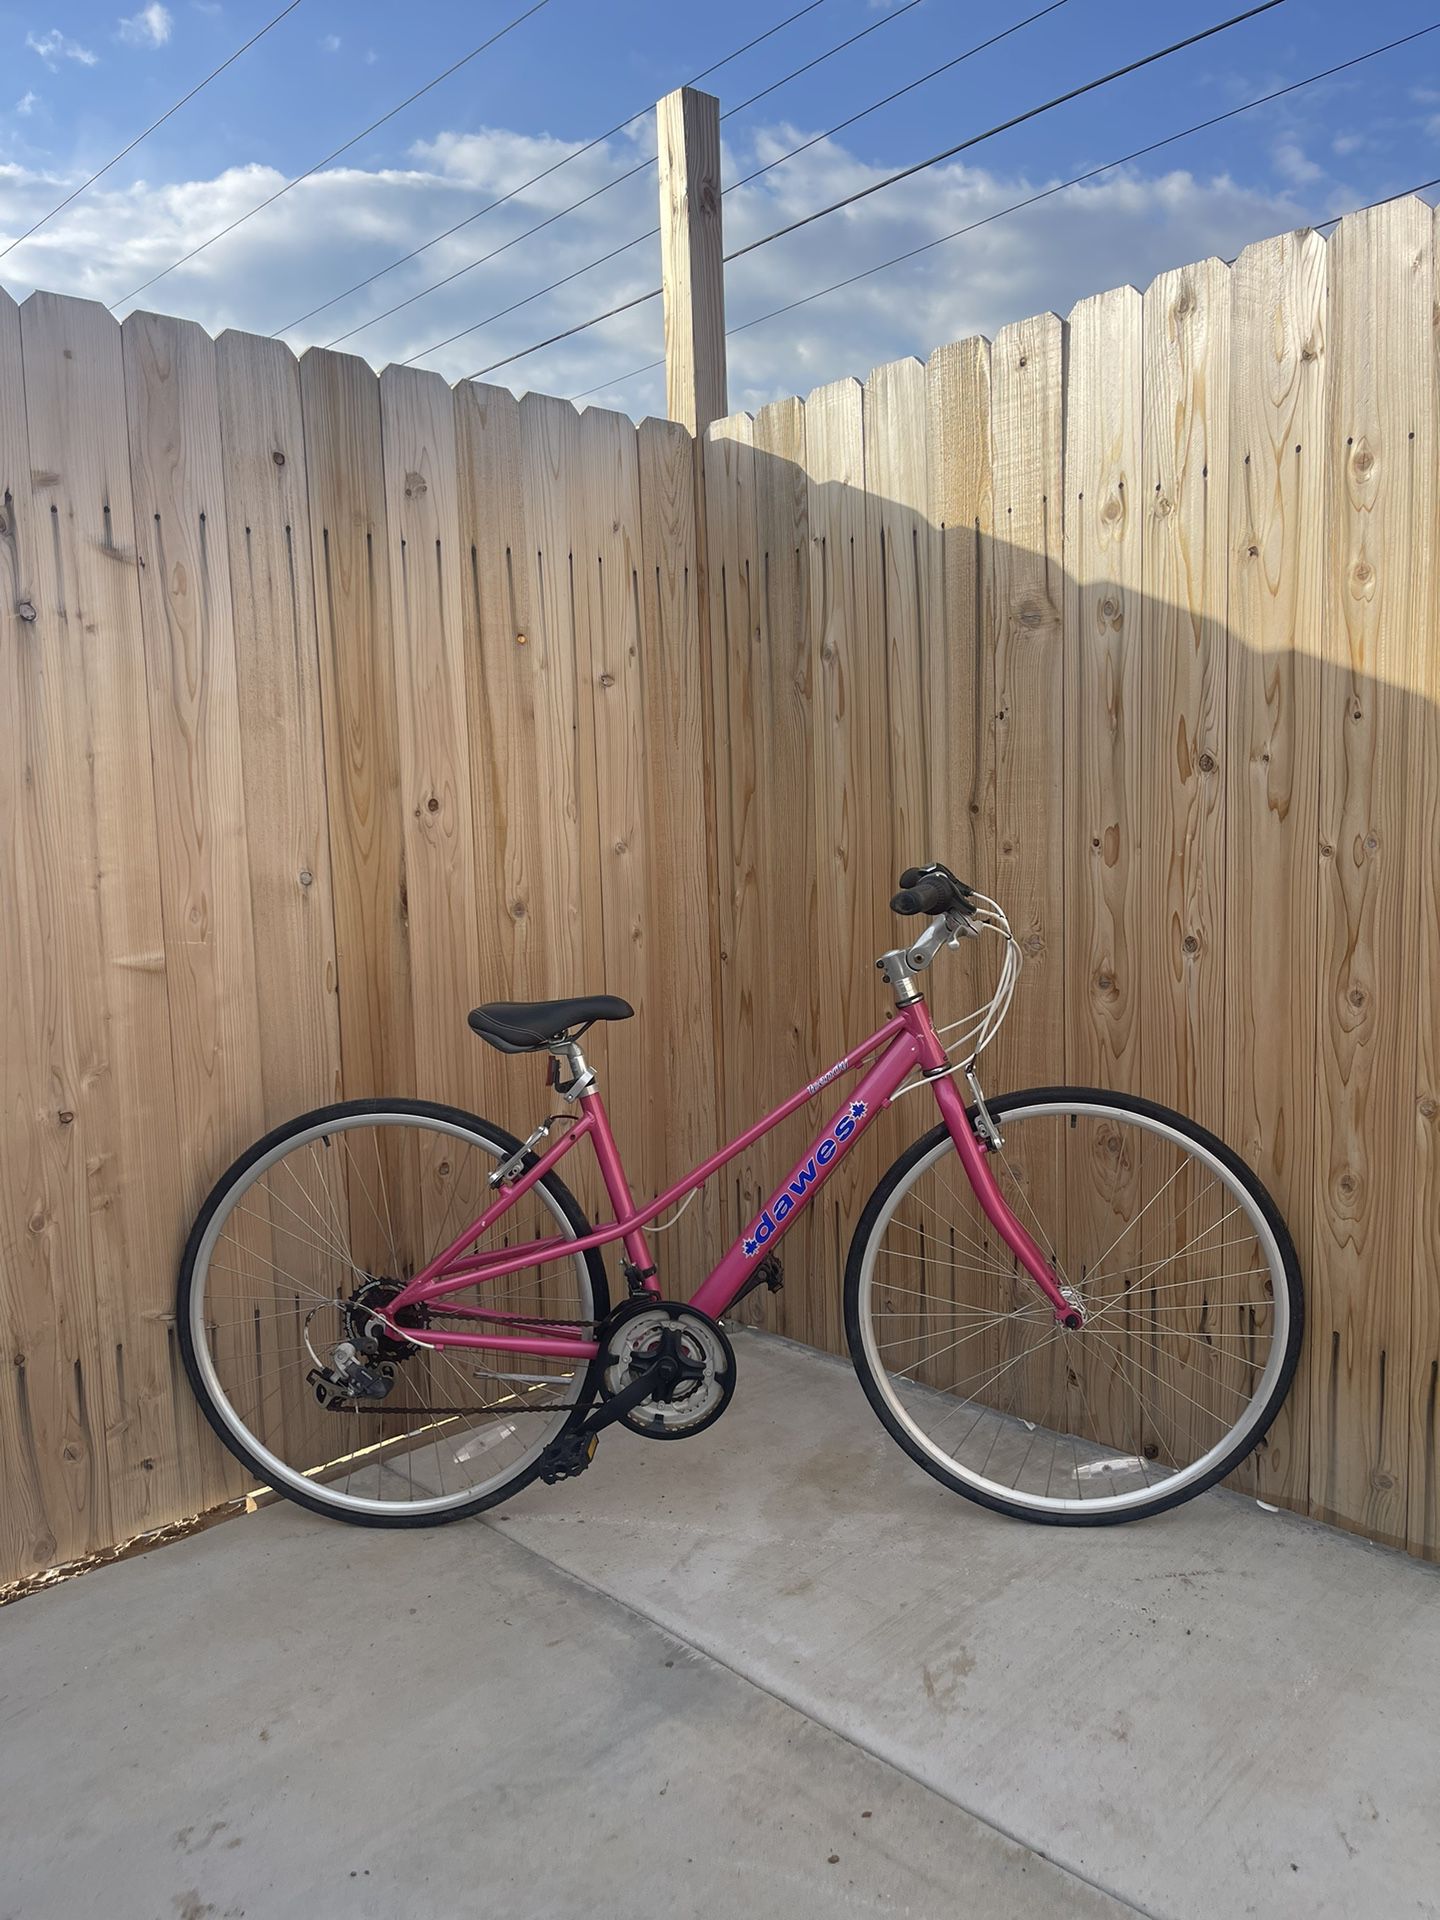 Dawes Woman’s Road Bike 80 Dollars First Come First Serve Need Gone Asap Open To Trades